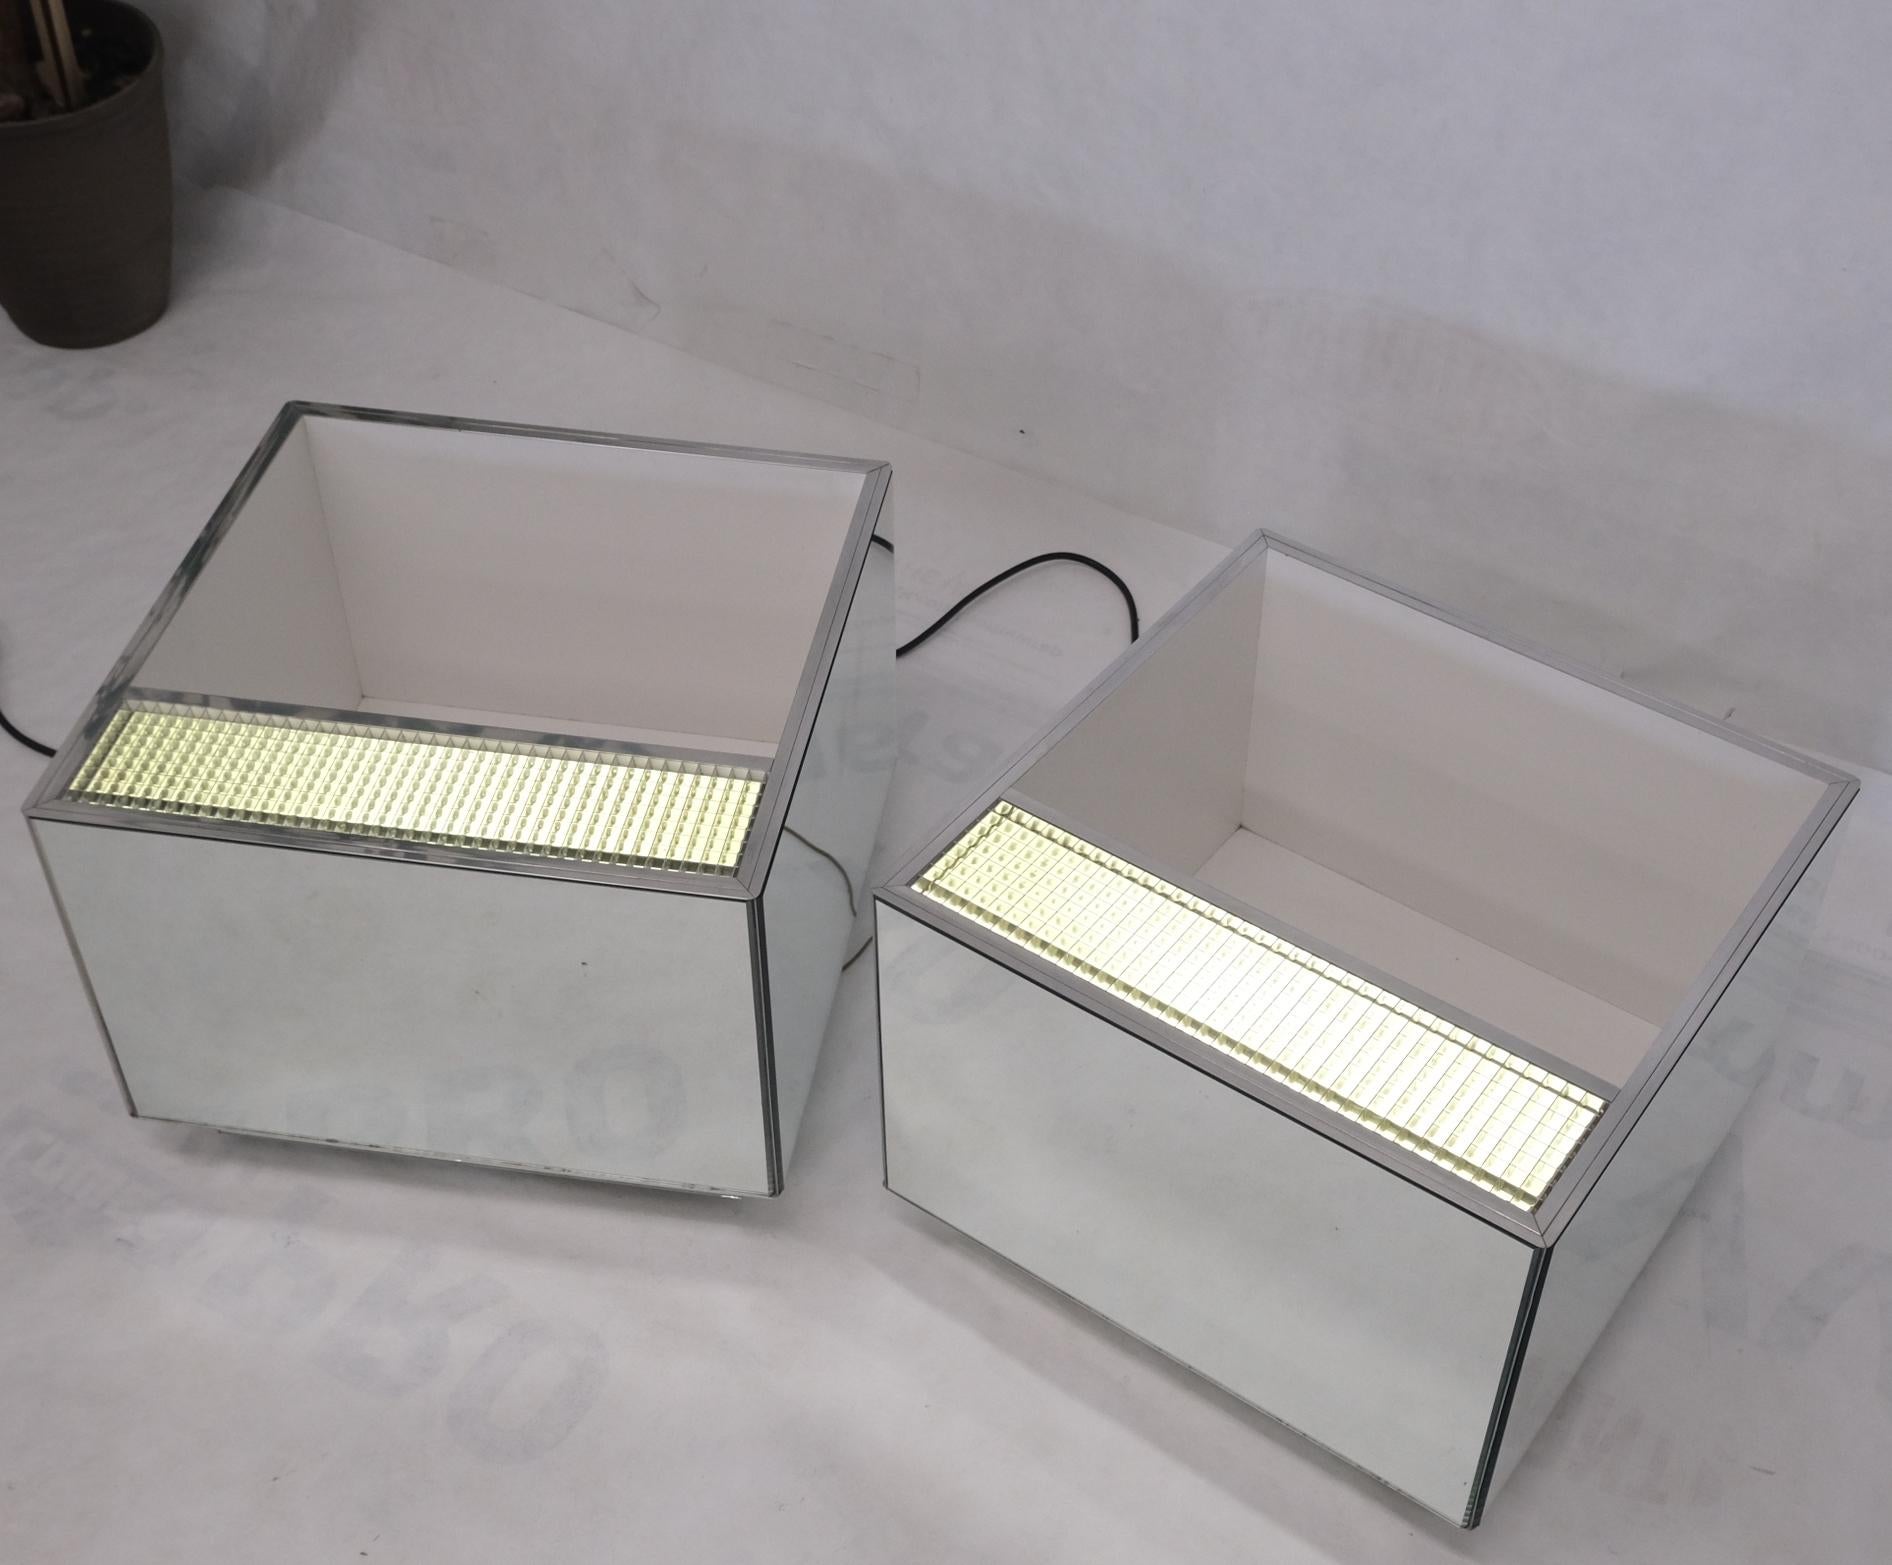 Pair of Very Fine Mirrored Box Planters Lights Stainless Steel Cases For Sale 2